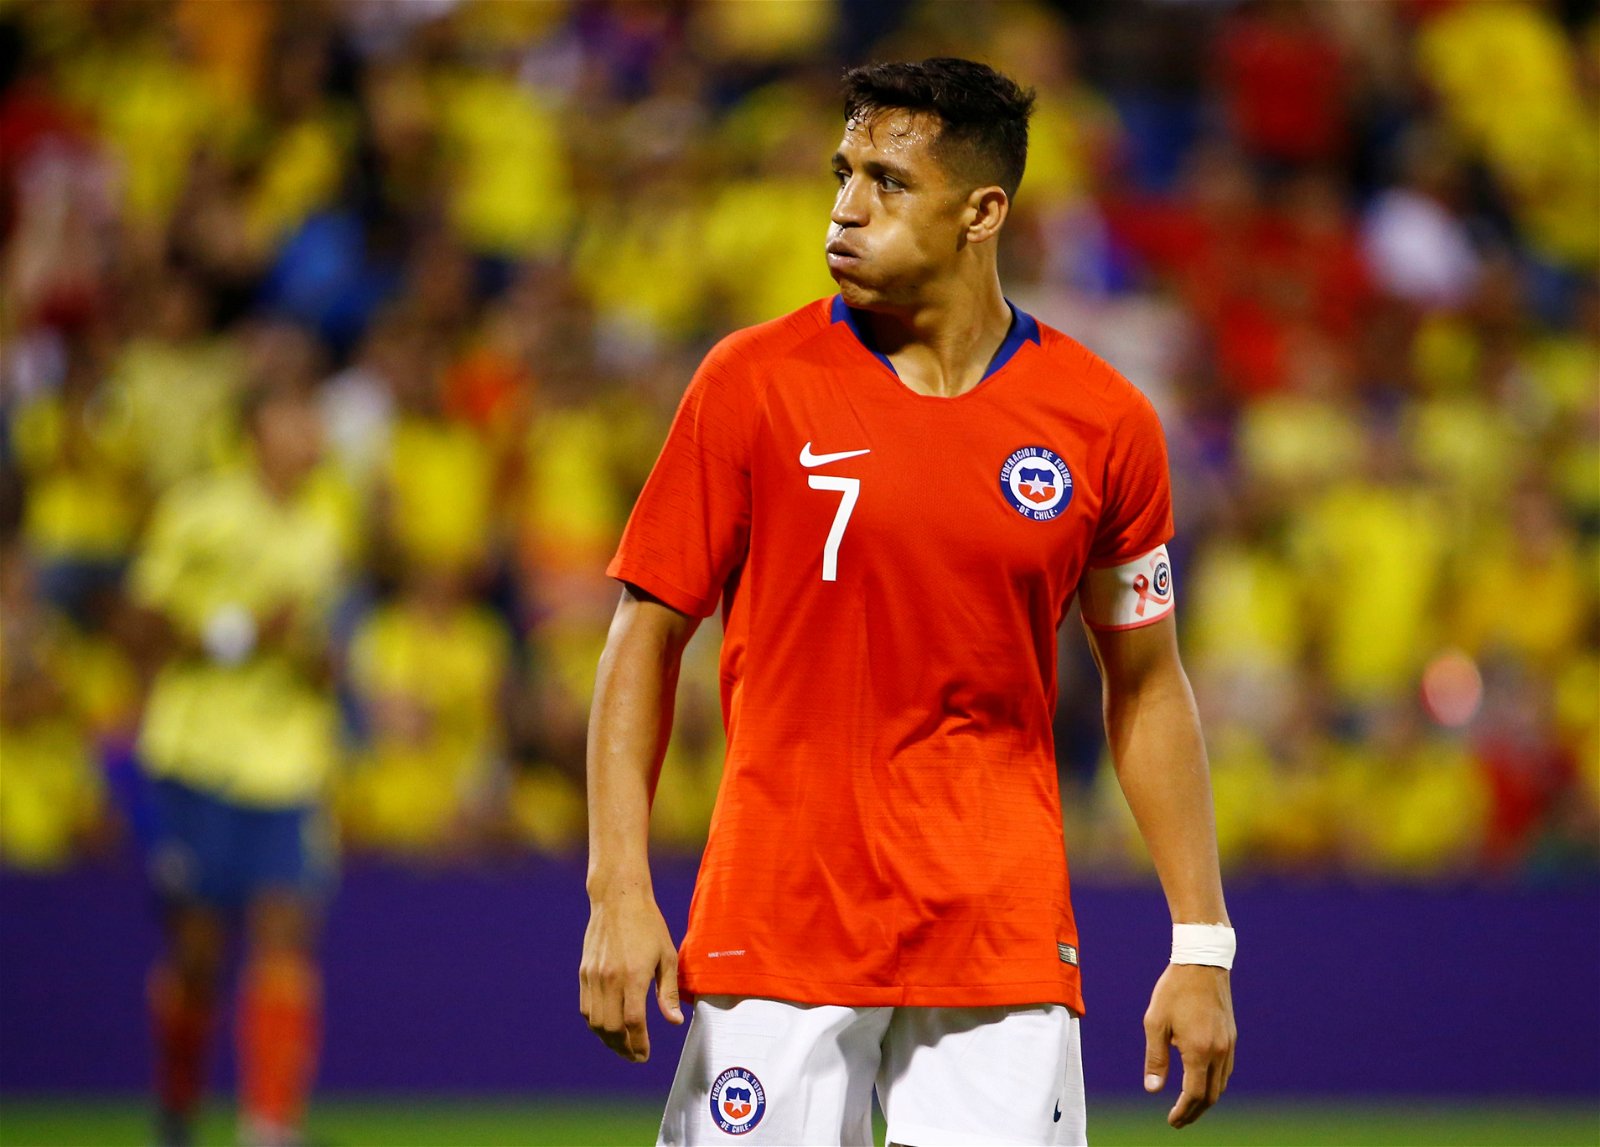 Chile injury-prone ace Alexis Sanchez out for three months with ankle injury